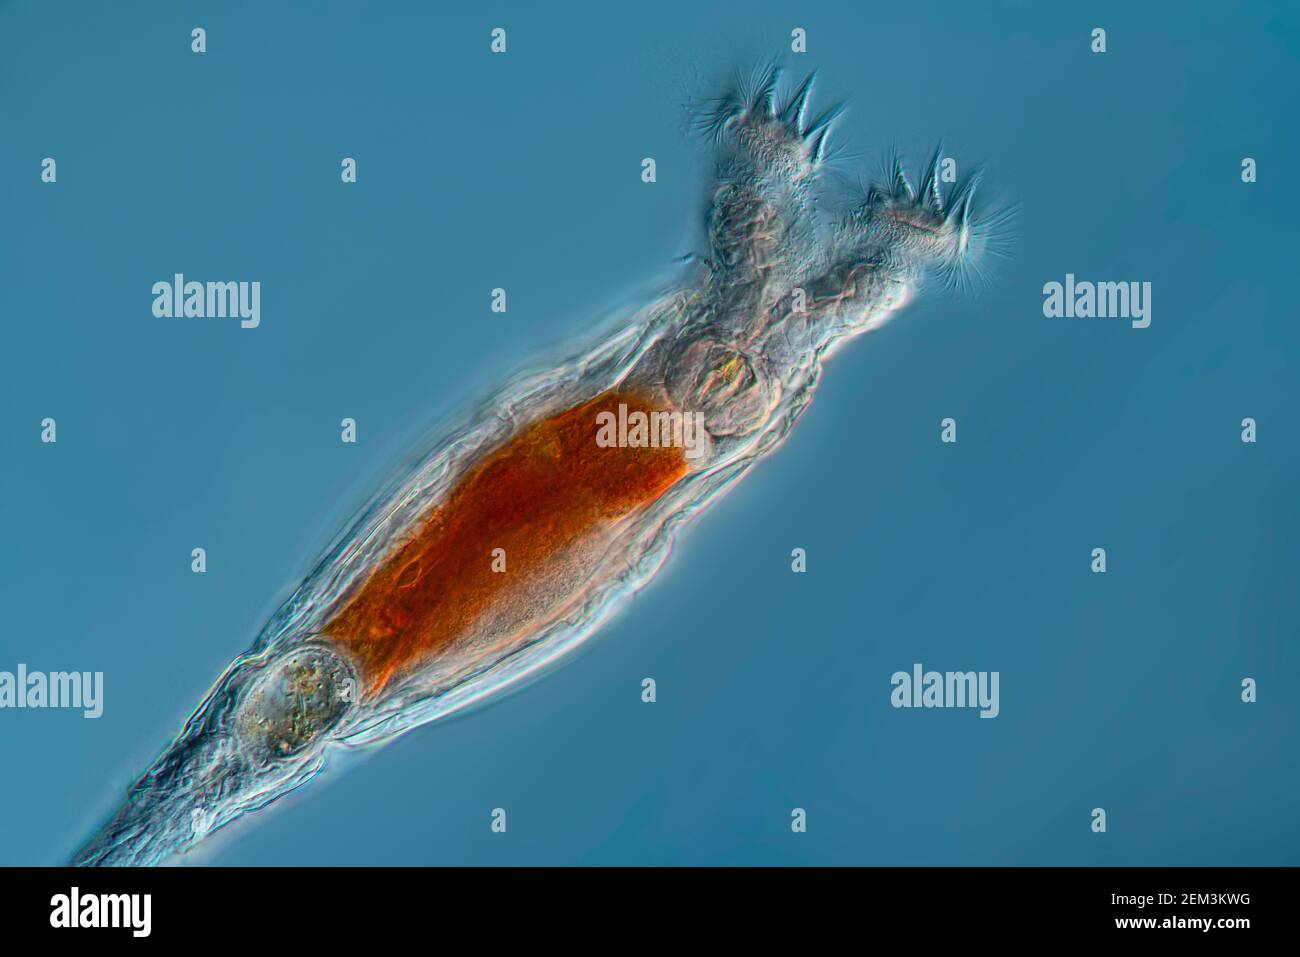 rotifer (Philodina roseola), Differential interference contrast microscope image, magnification: x 50 related to 36 mm, Germany Stock Photo